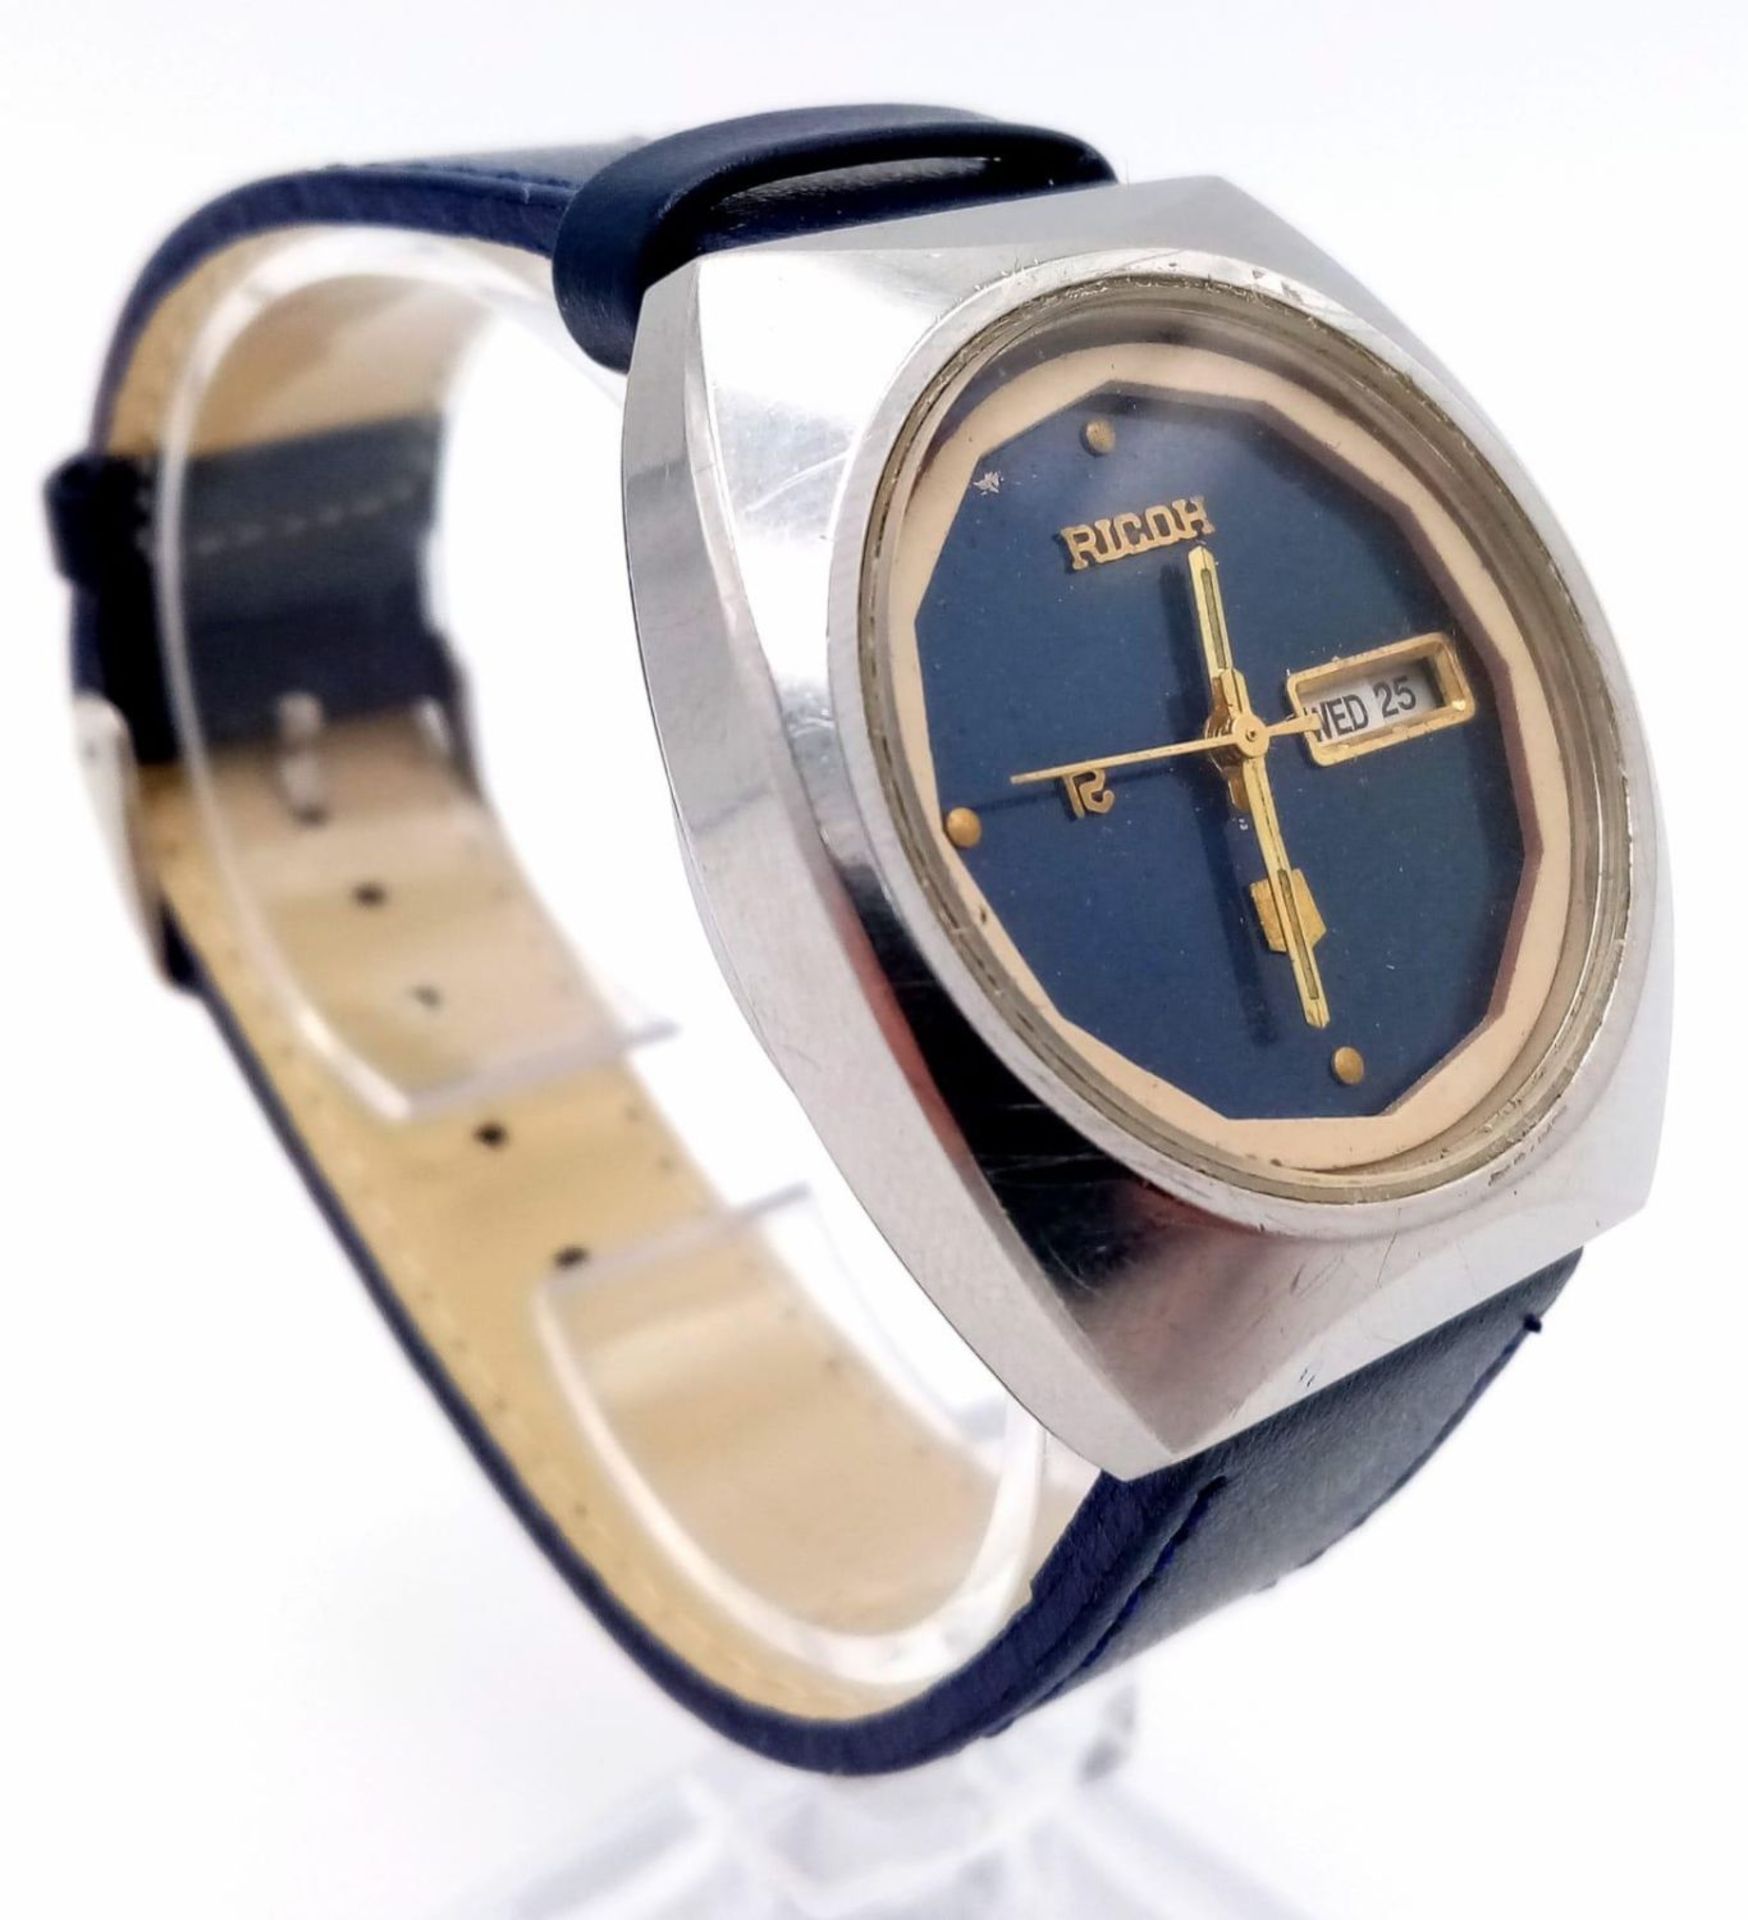 A Vintage Ricoh Automatic Gents Watch. Blue leather strap. Stainless steel case - 37mm. Blue dial - Image 7 of 12